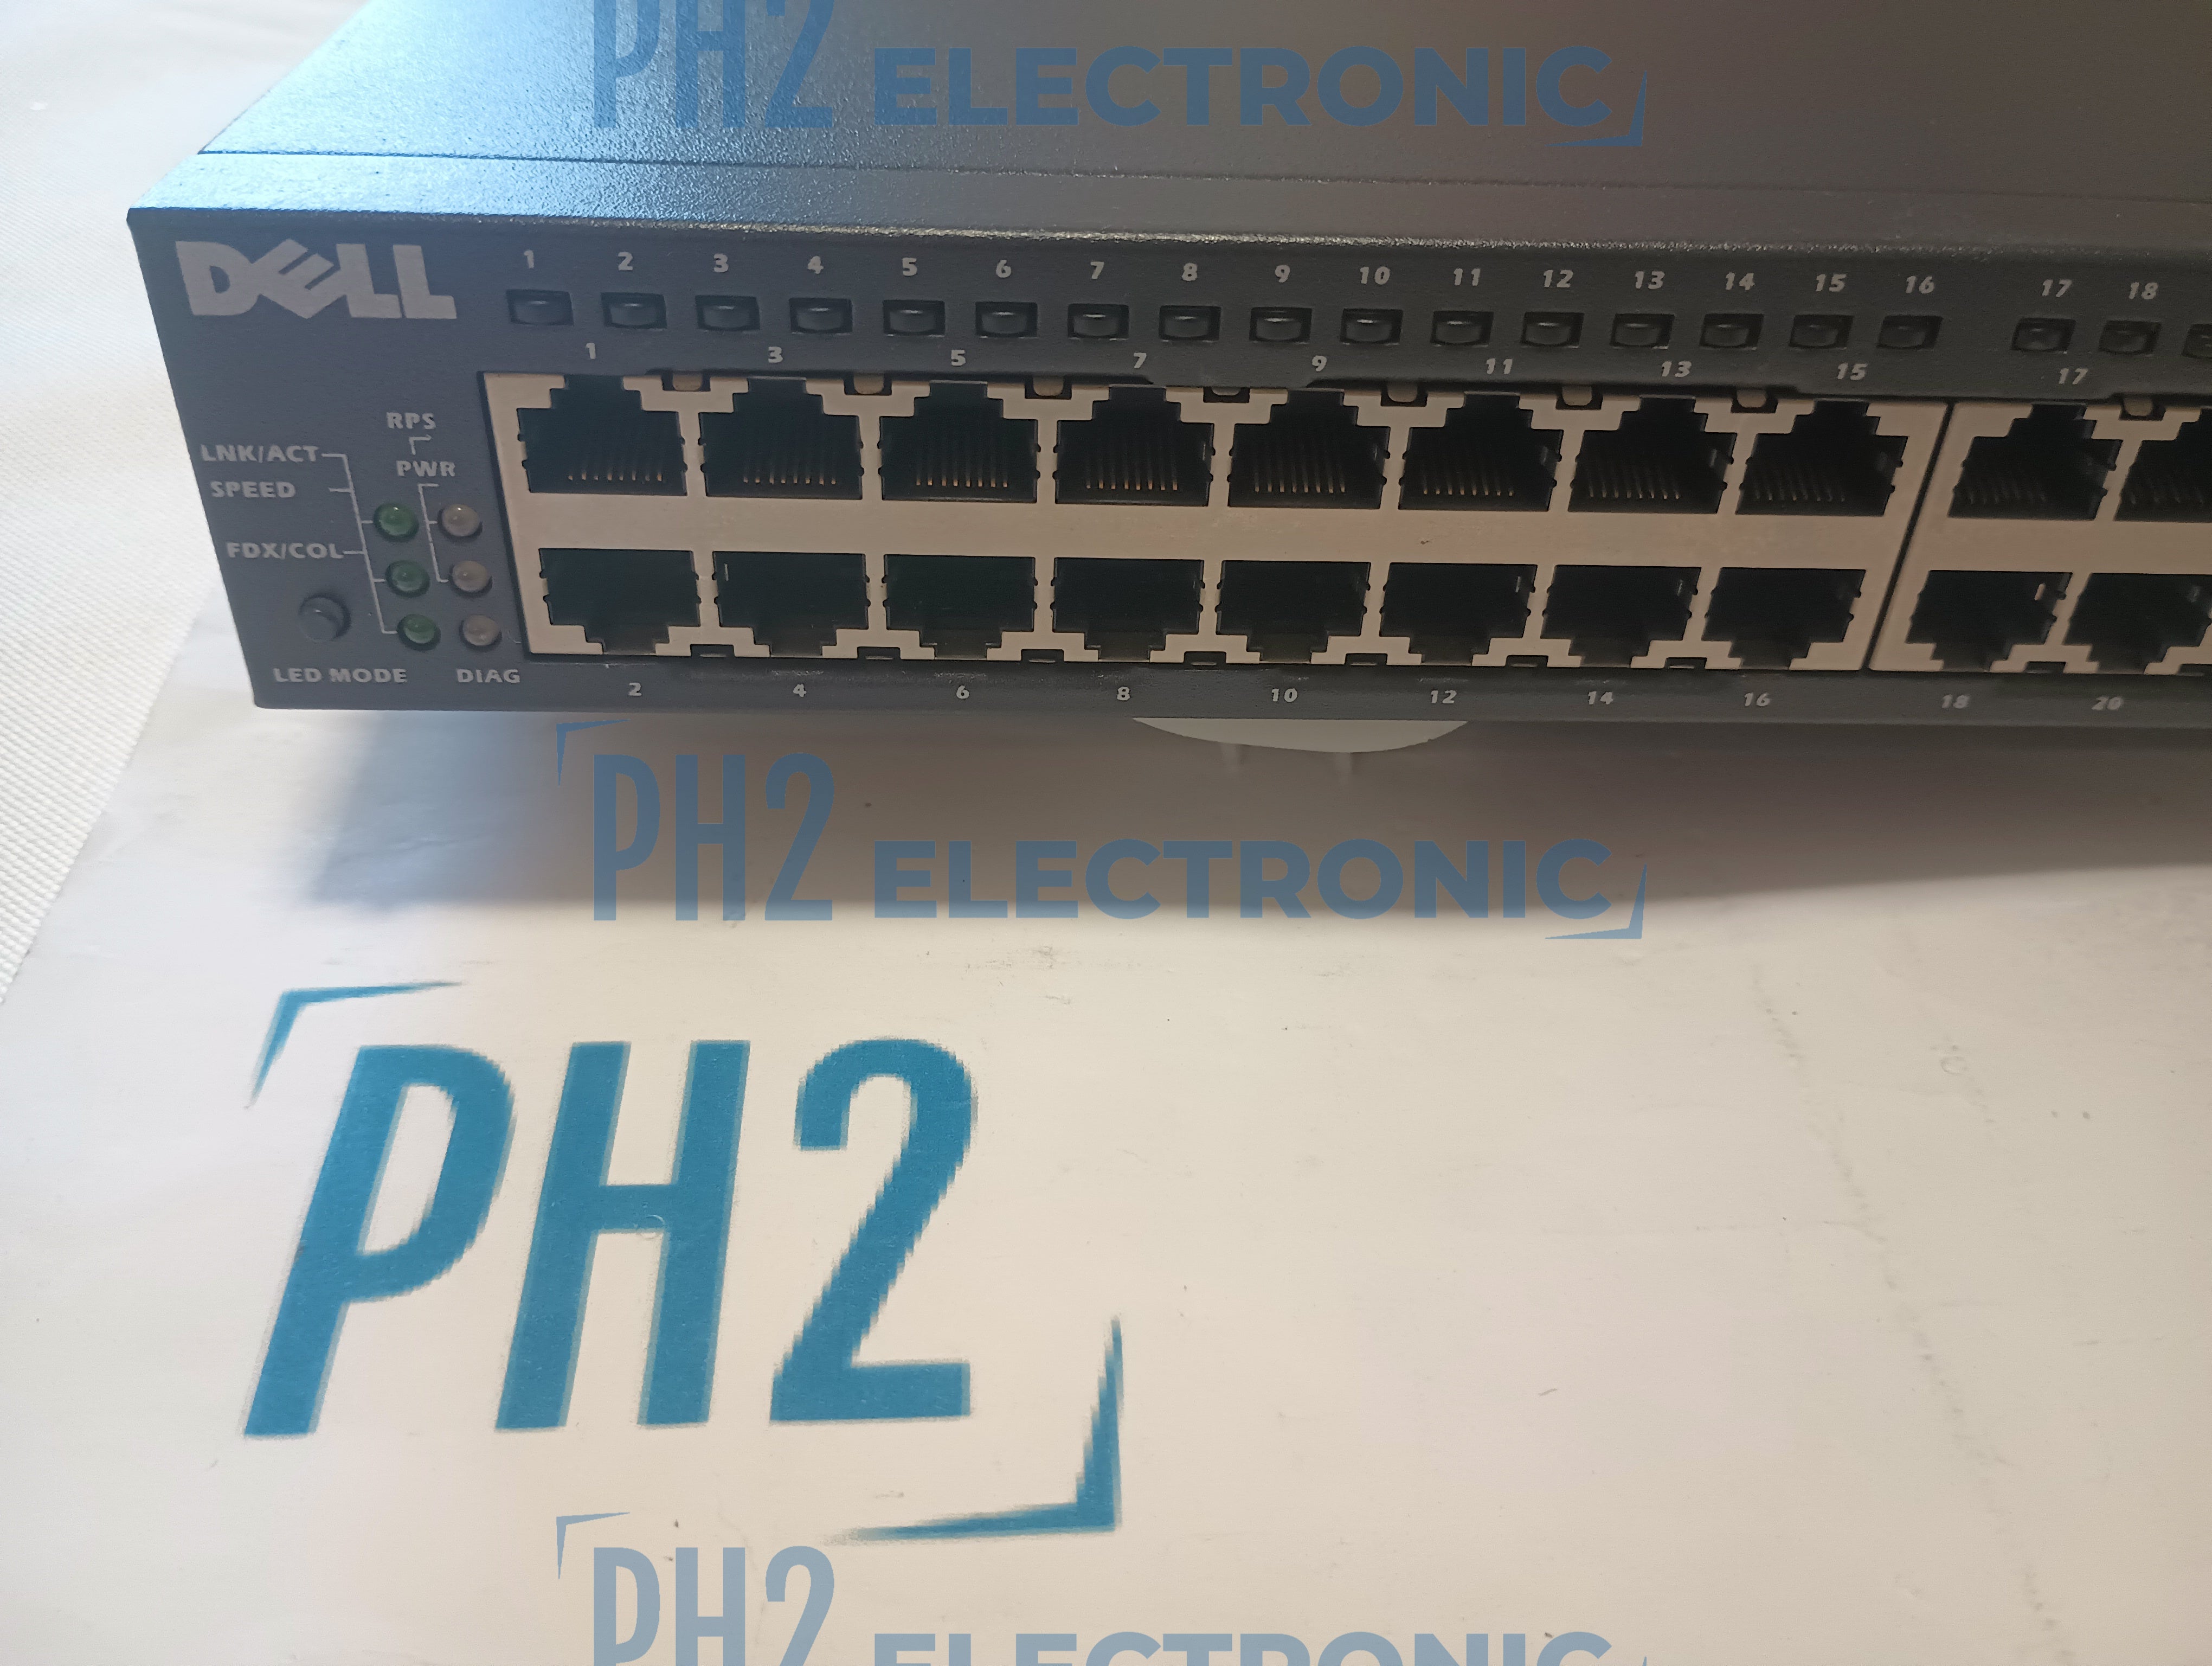 DELL 2T186 1T144 PowerConnect 3048 A04 Managed Switch 48 Port 10/100 Fast Ethern